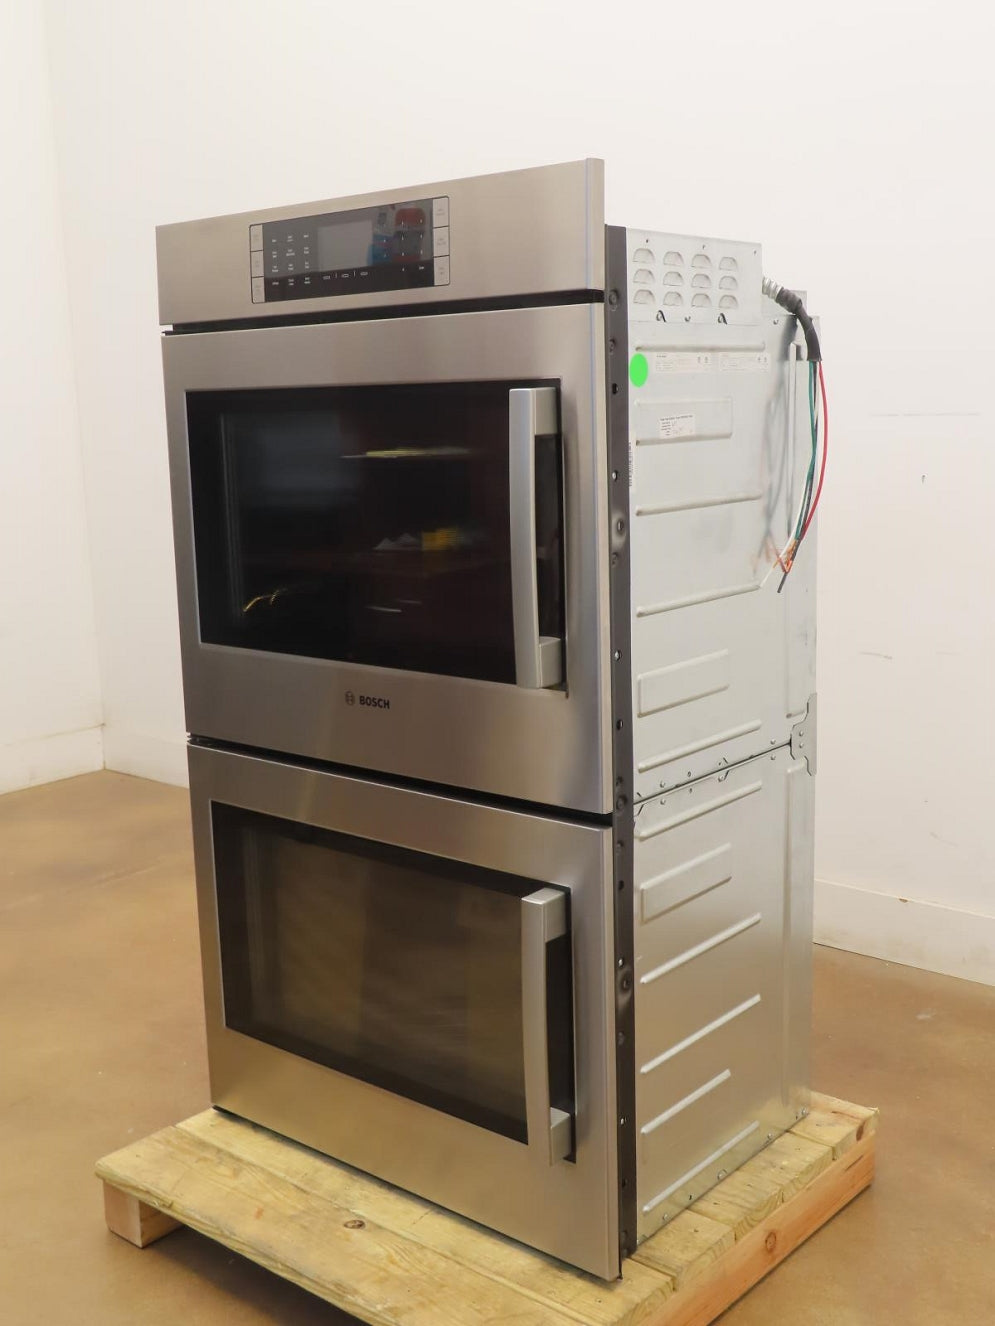 HBLP651LUC Double Wall Oven